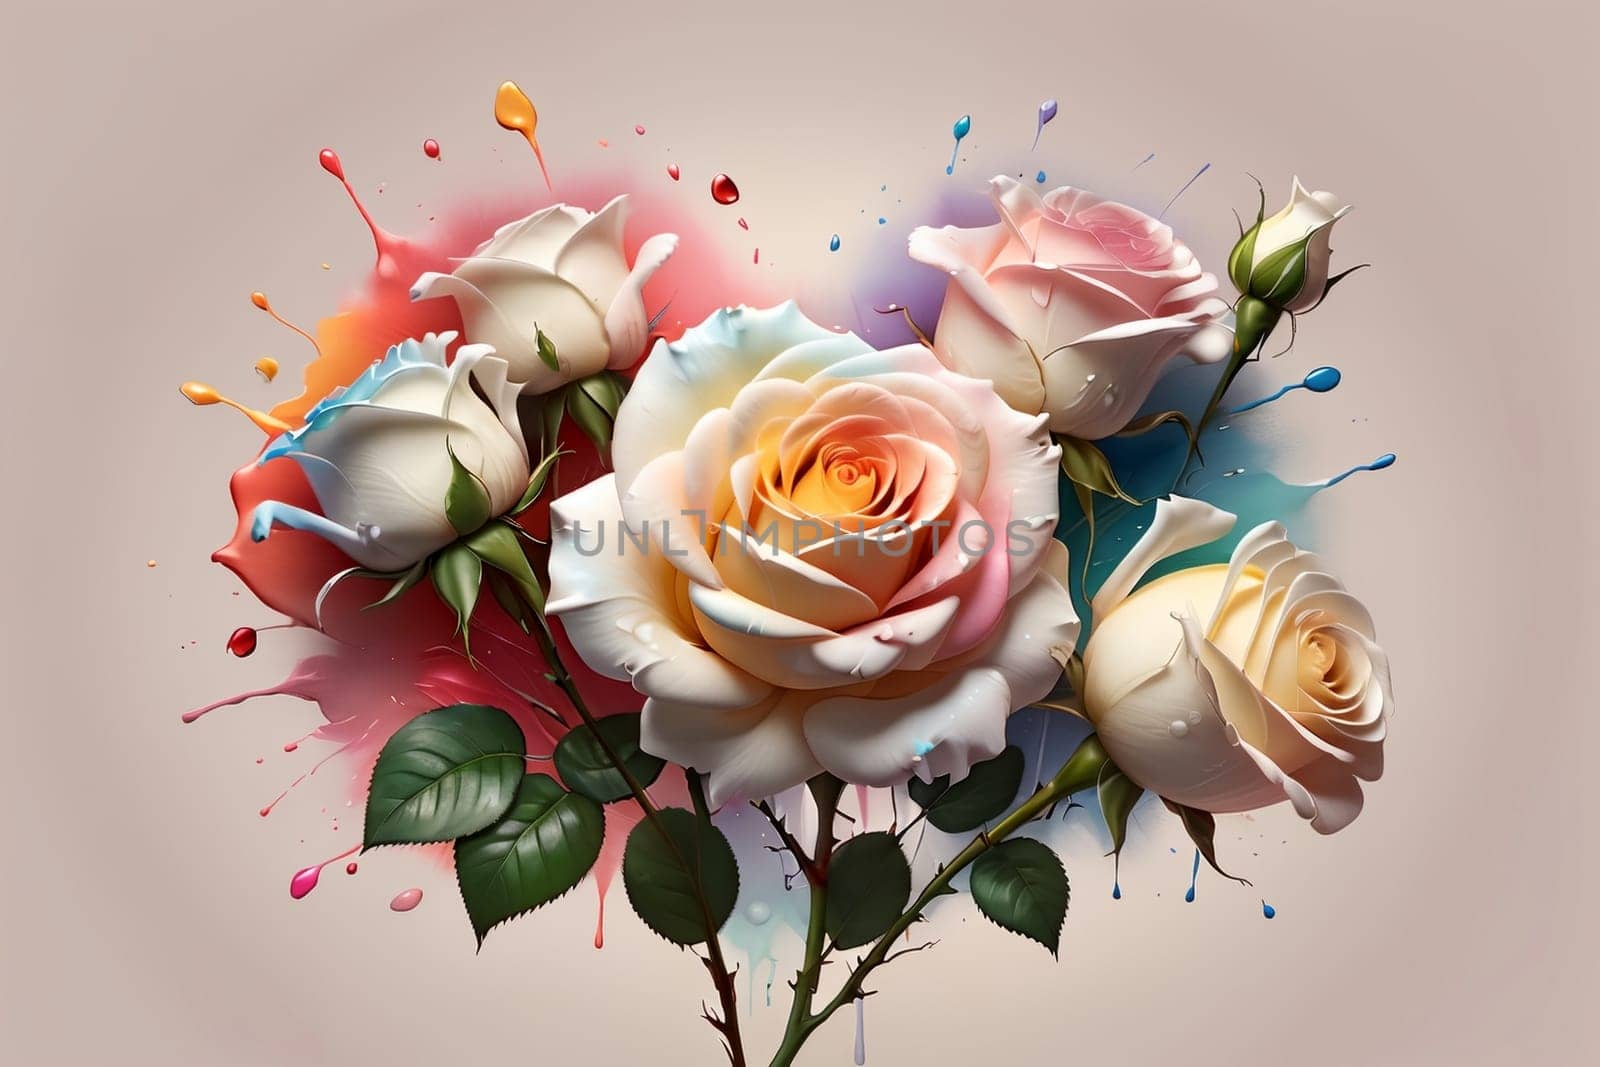 bouquet of bright multi-colored roses on a light background by Rawlik